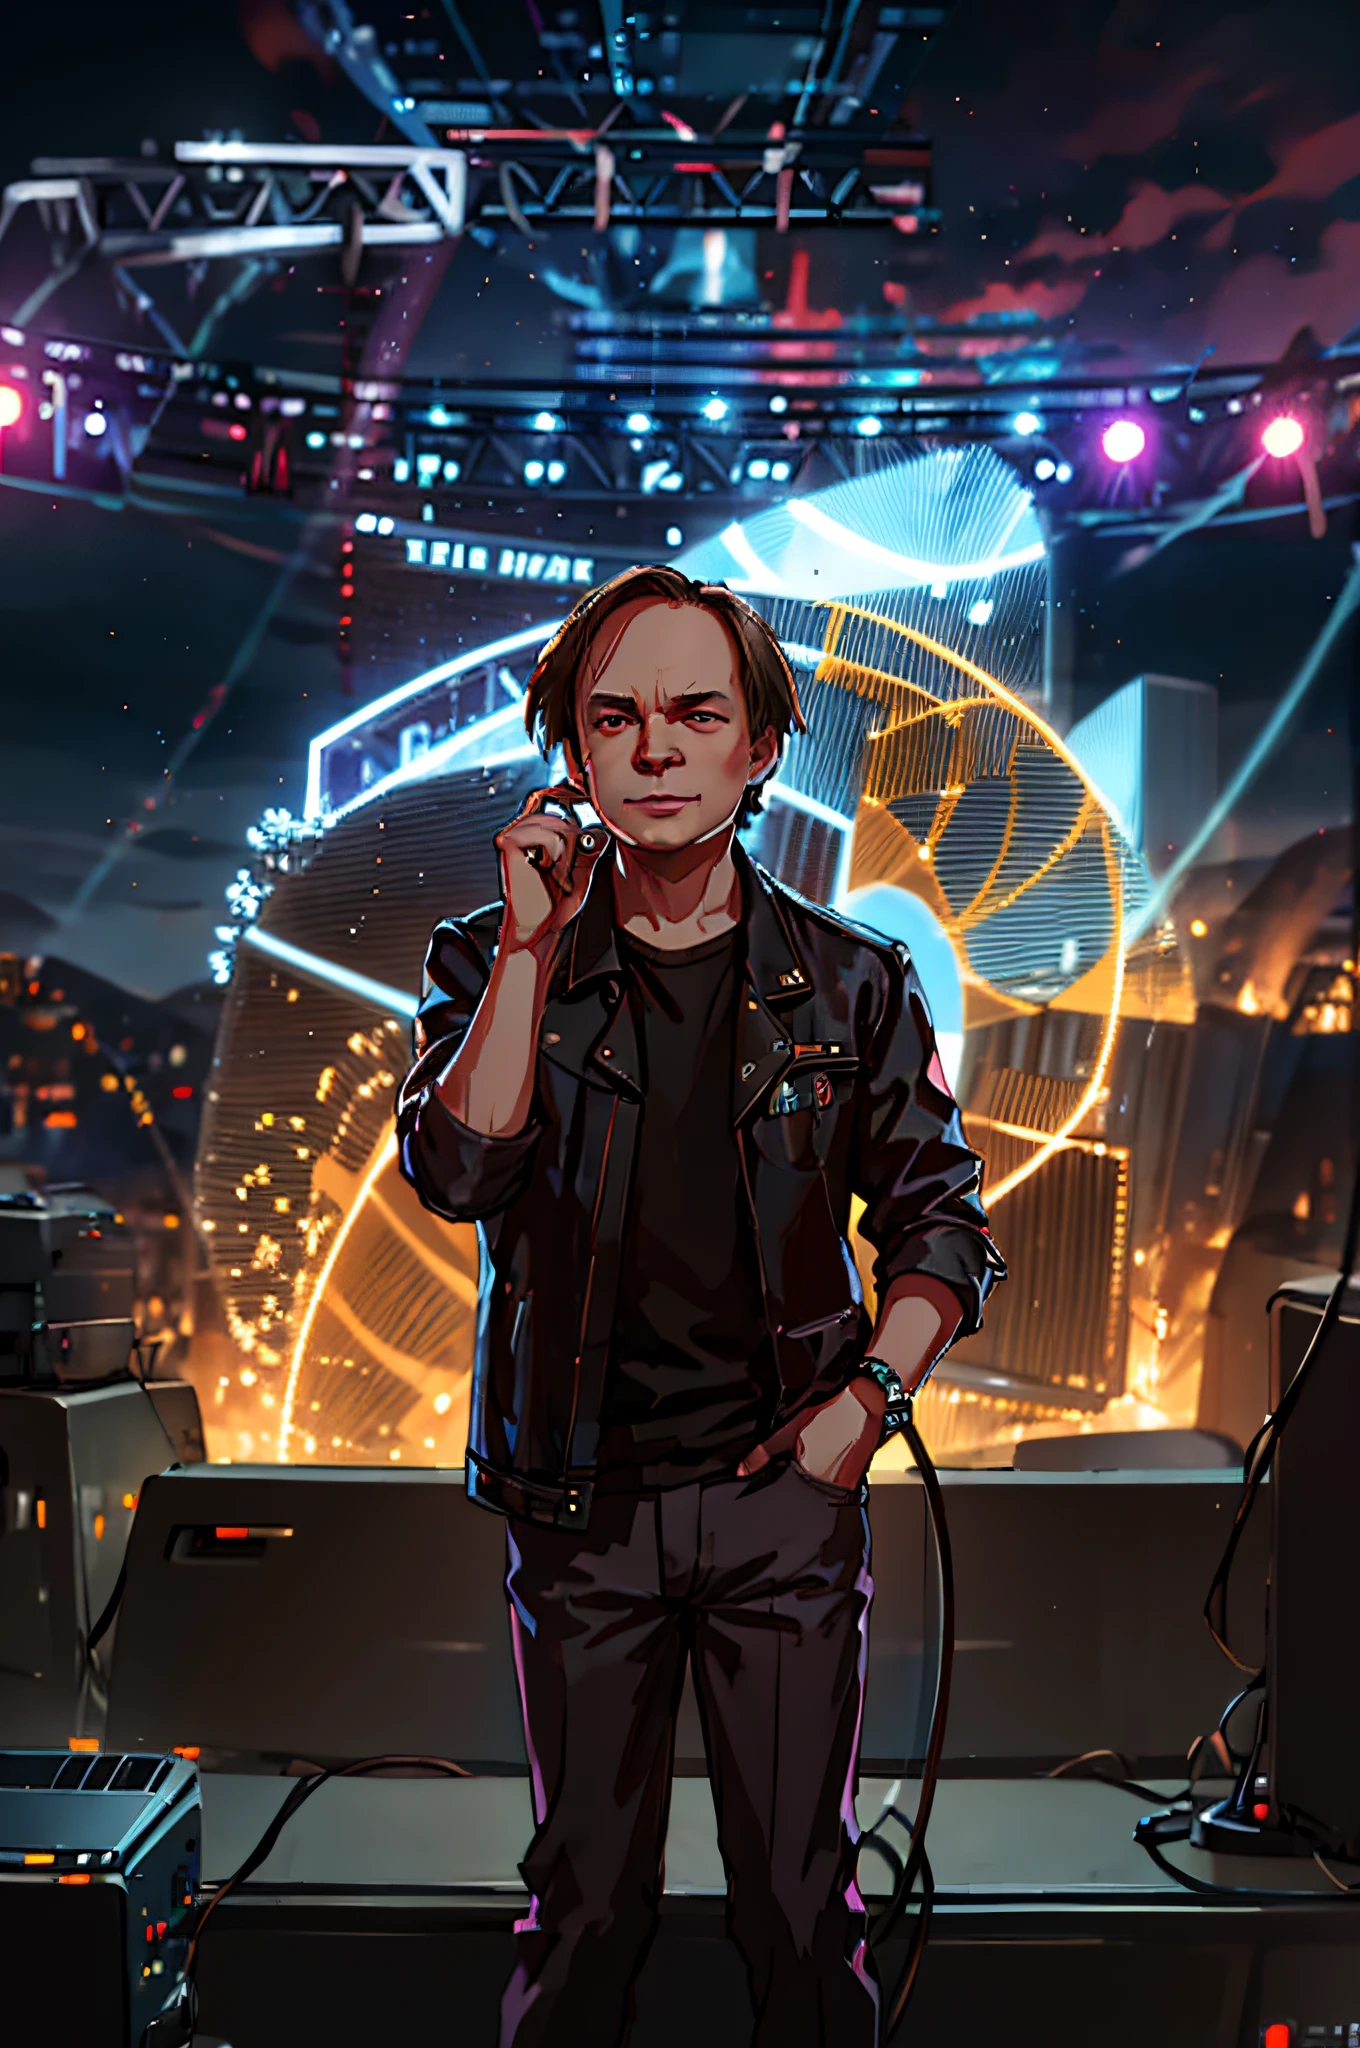 "Experience the electrifying energy of Sid Meier's game concert as he takes the stage, microphone in hand, ready to deliver a speech that will inspire and captivate the audience."